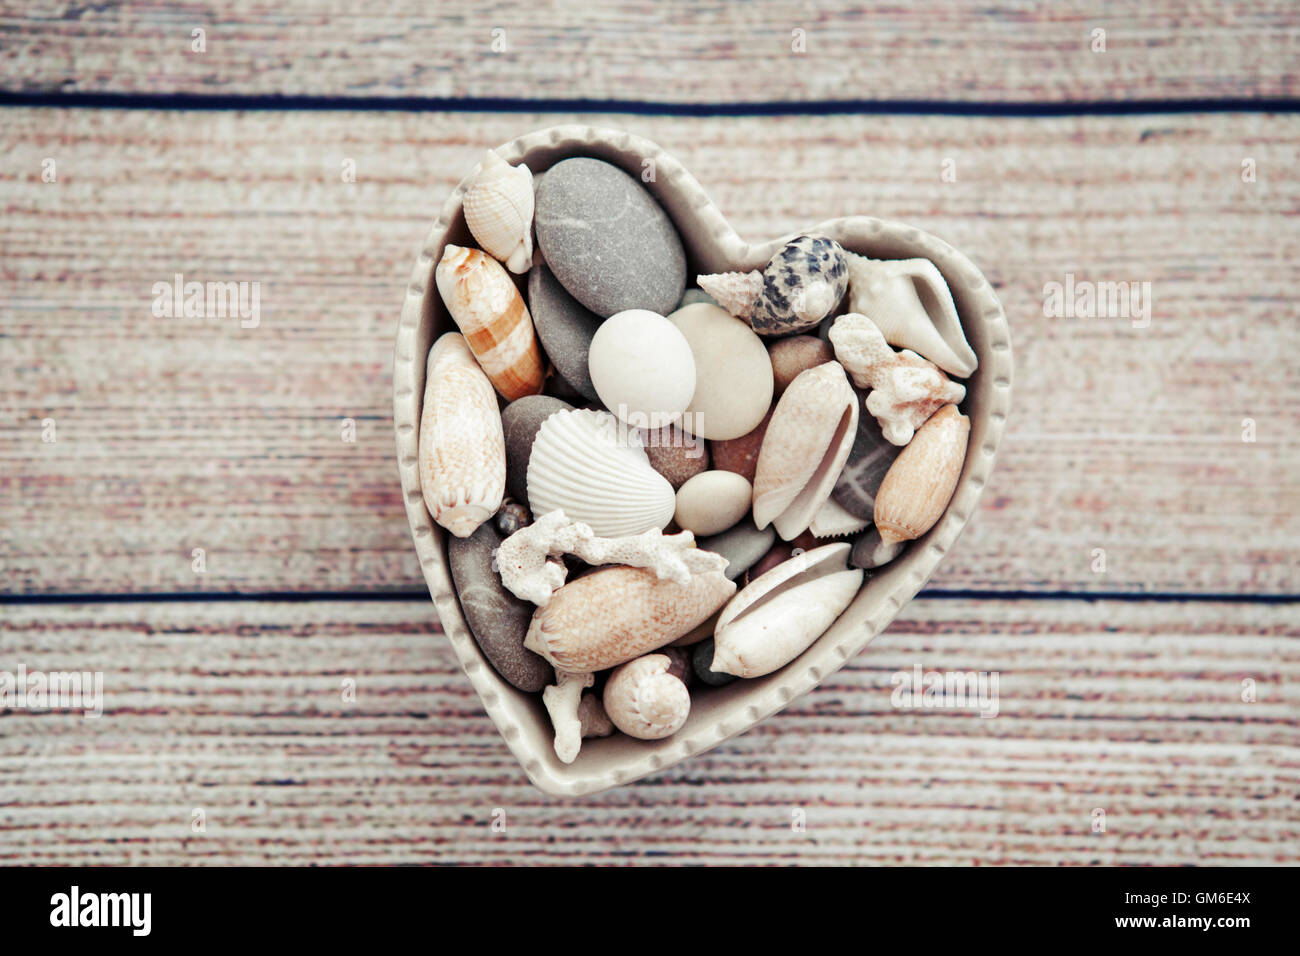 Souvenirs of the seaside in a heart shaped bowl Stock Photo